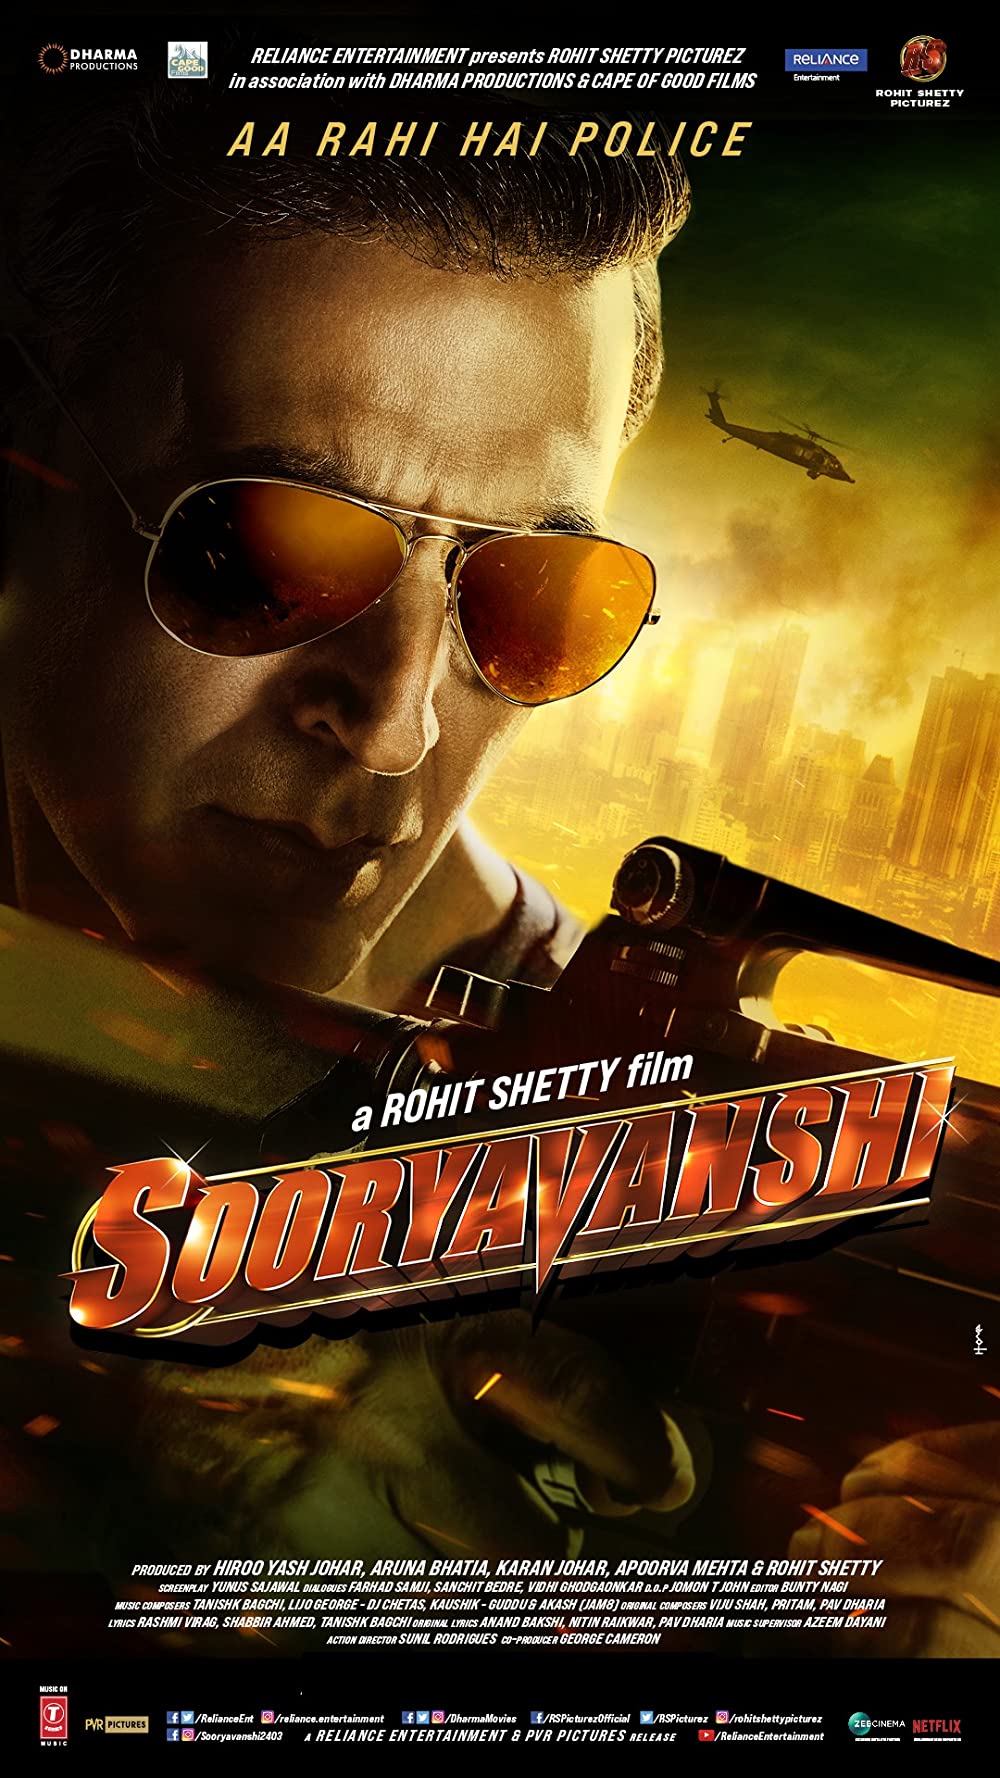 Sooryavanshi Movie (2021) Cast & Crew, Release Date, Story, Review, Poster, Trailer, Budget, Collection 